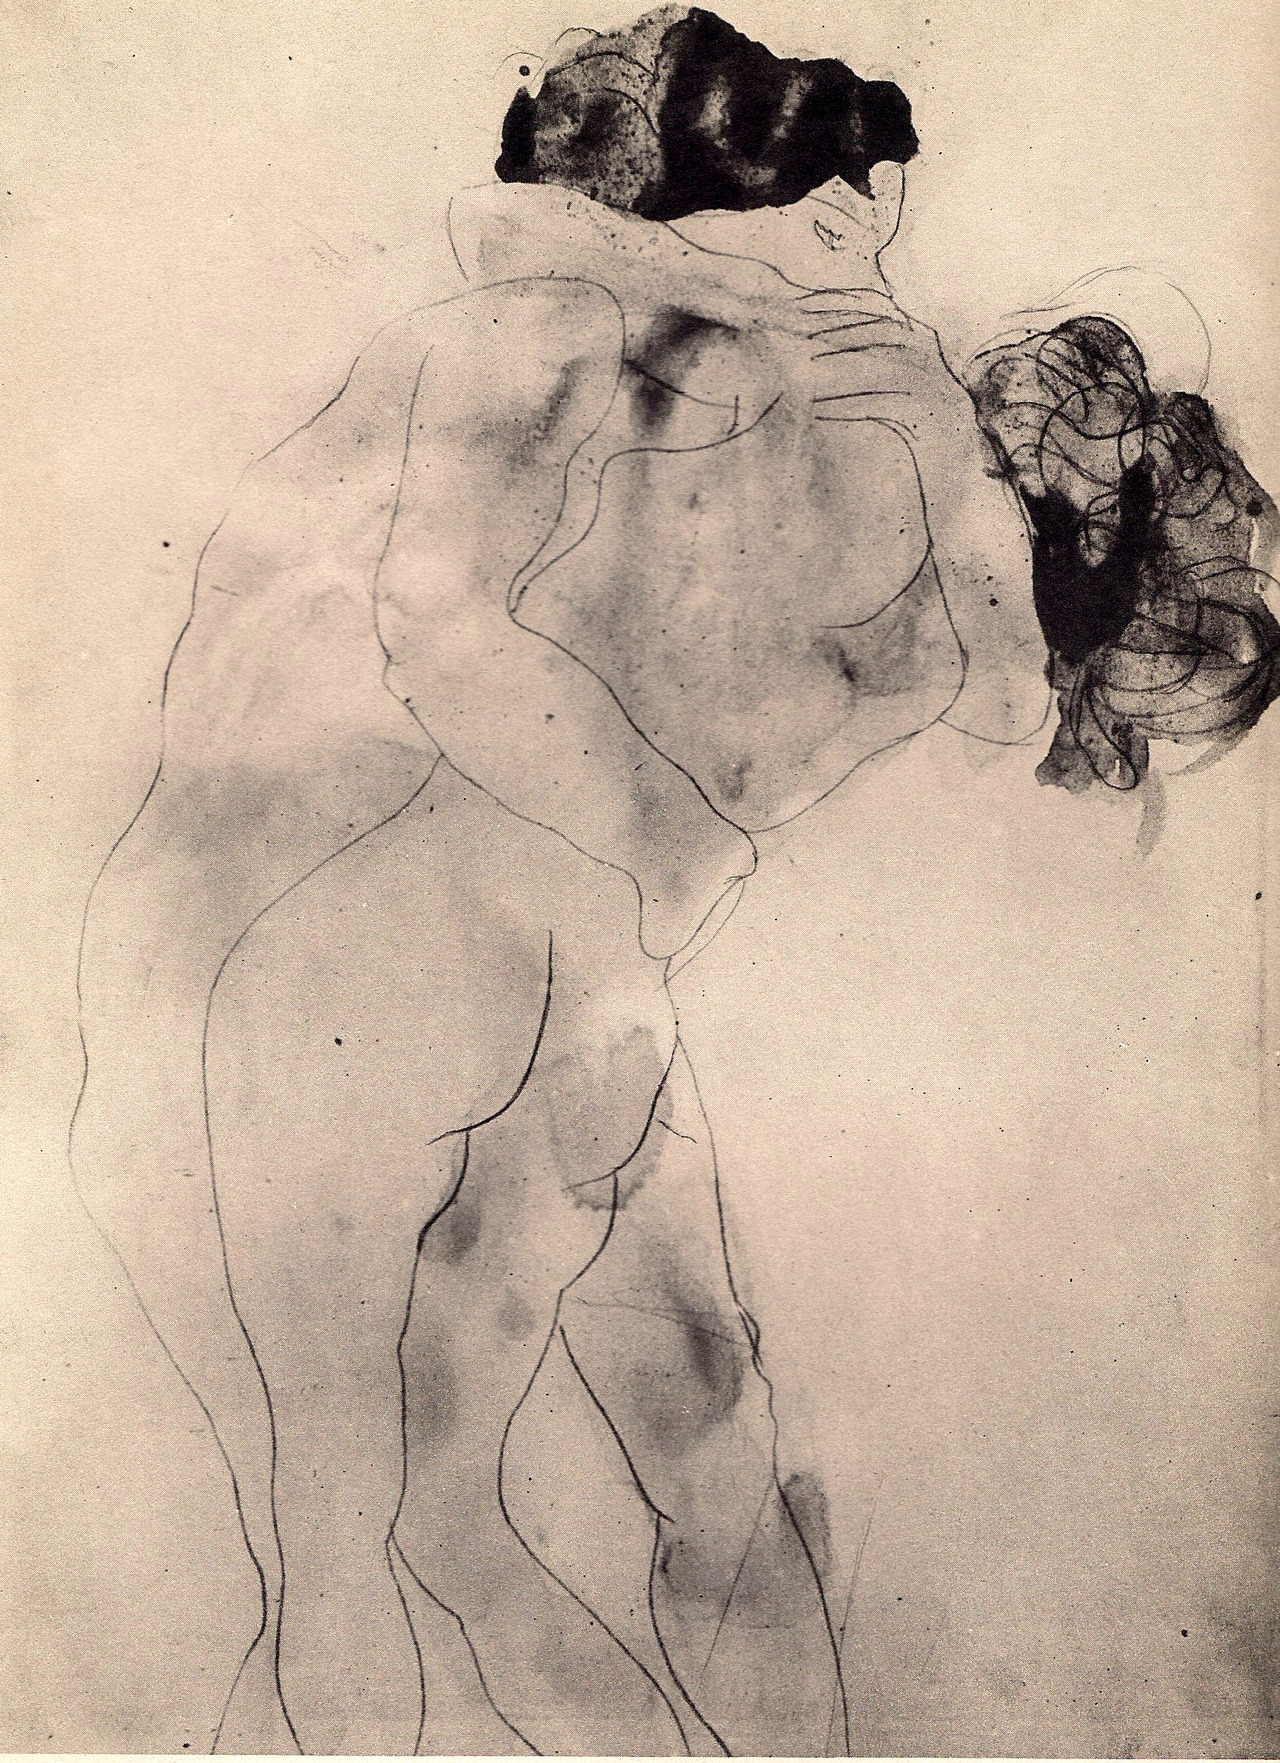  Auguste Rodin, The Embrace, n.d. 